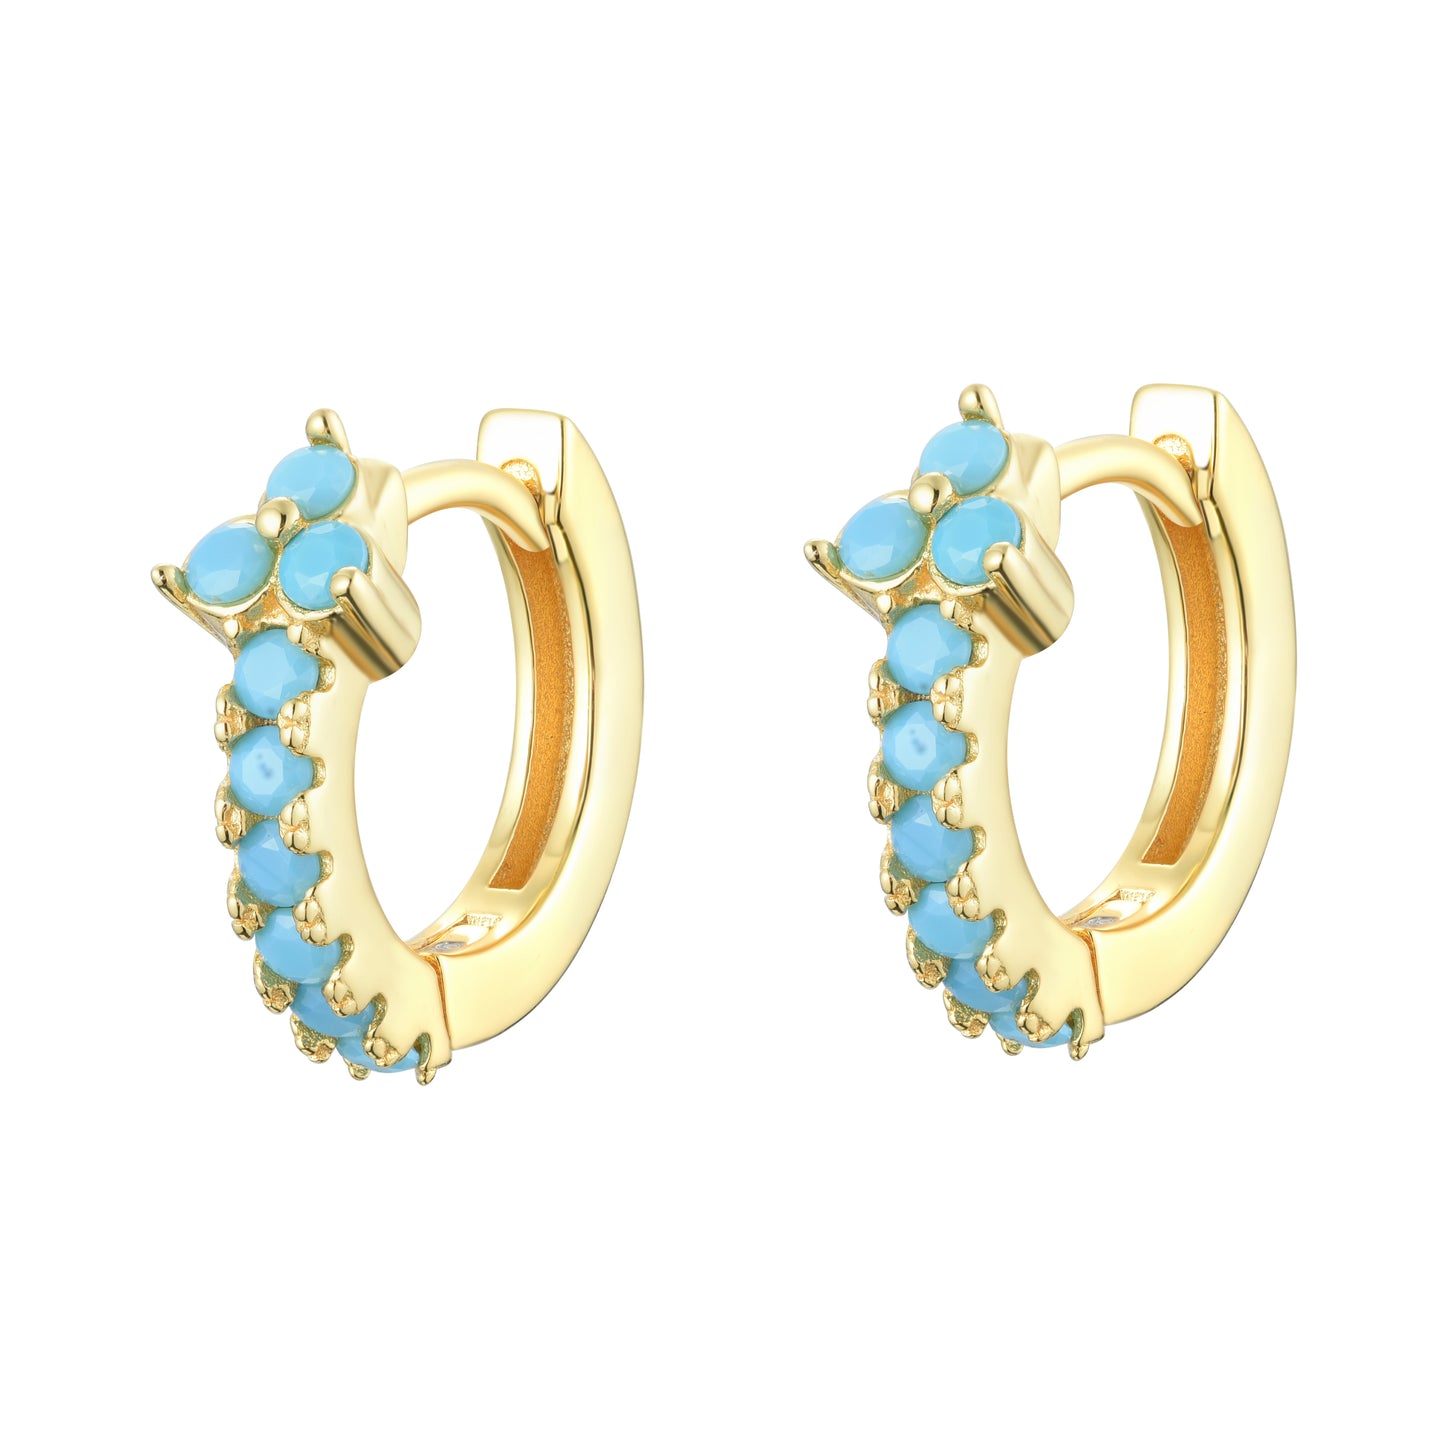 EG-37/G/Turquoise - Hoop Earring with Turquoise decoration